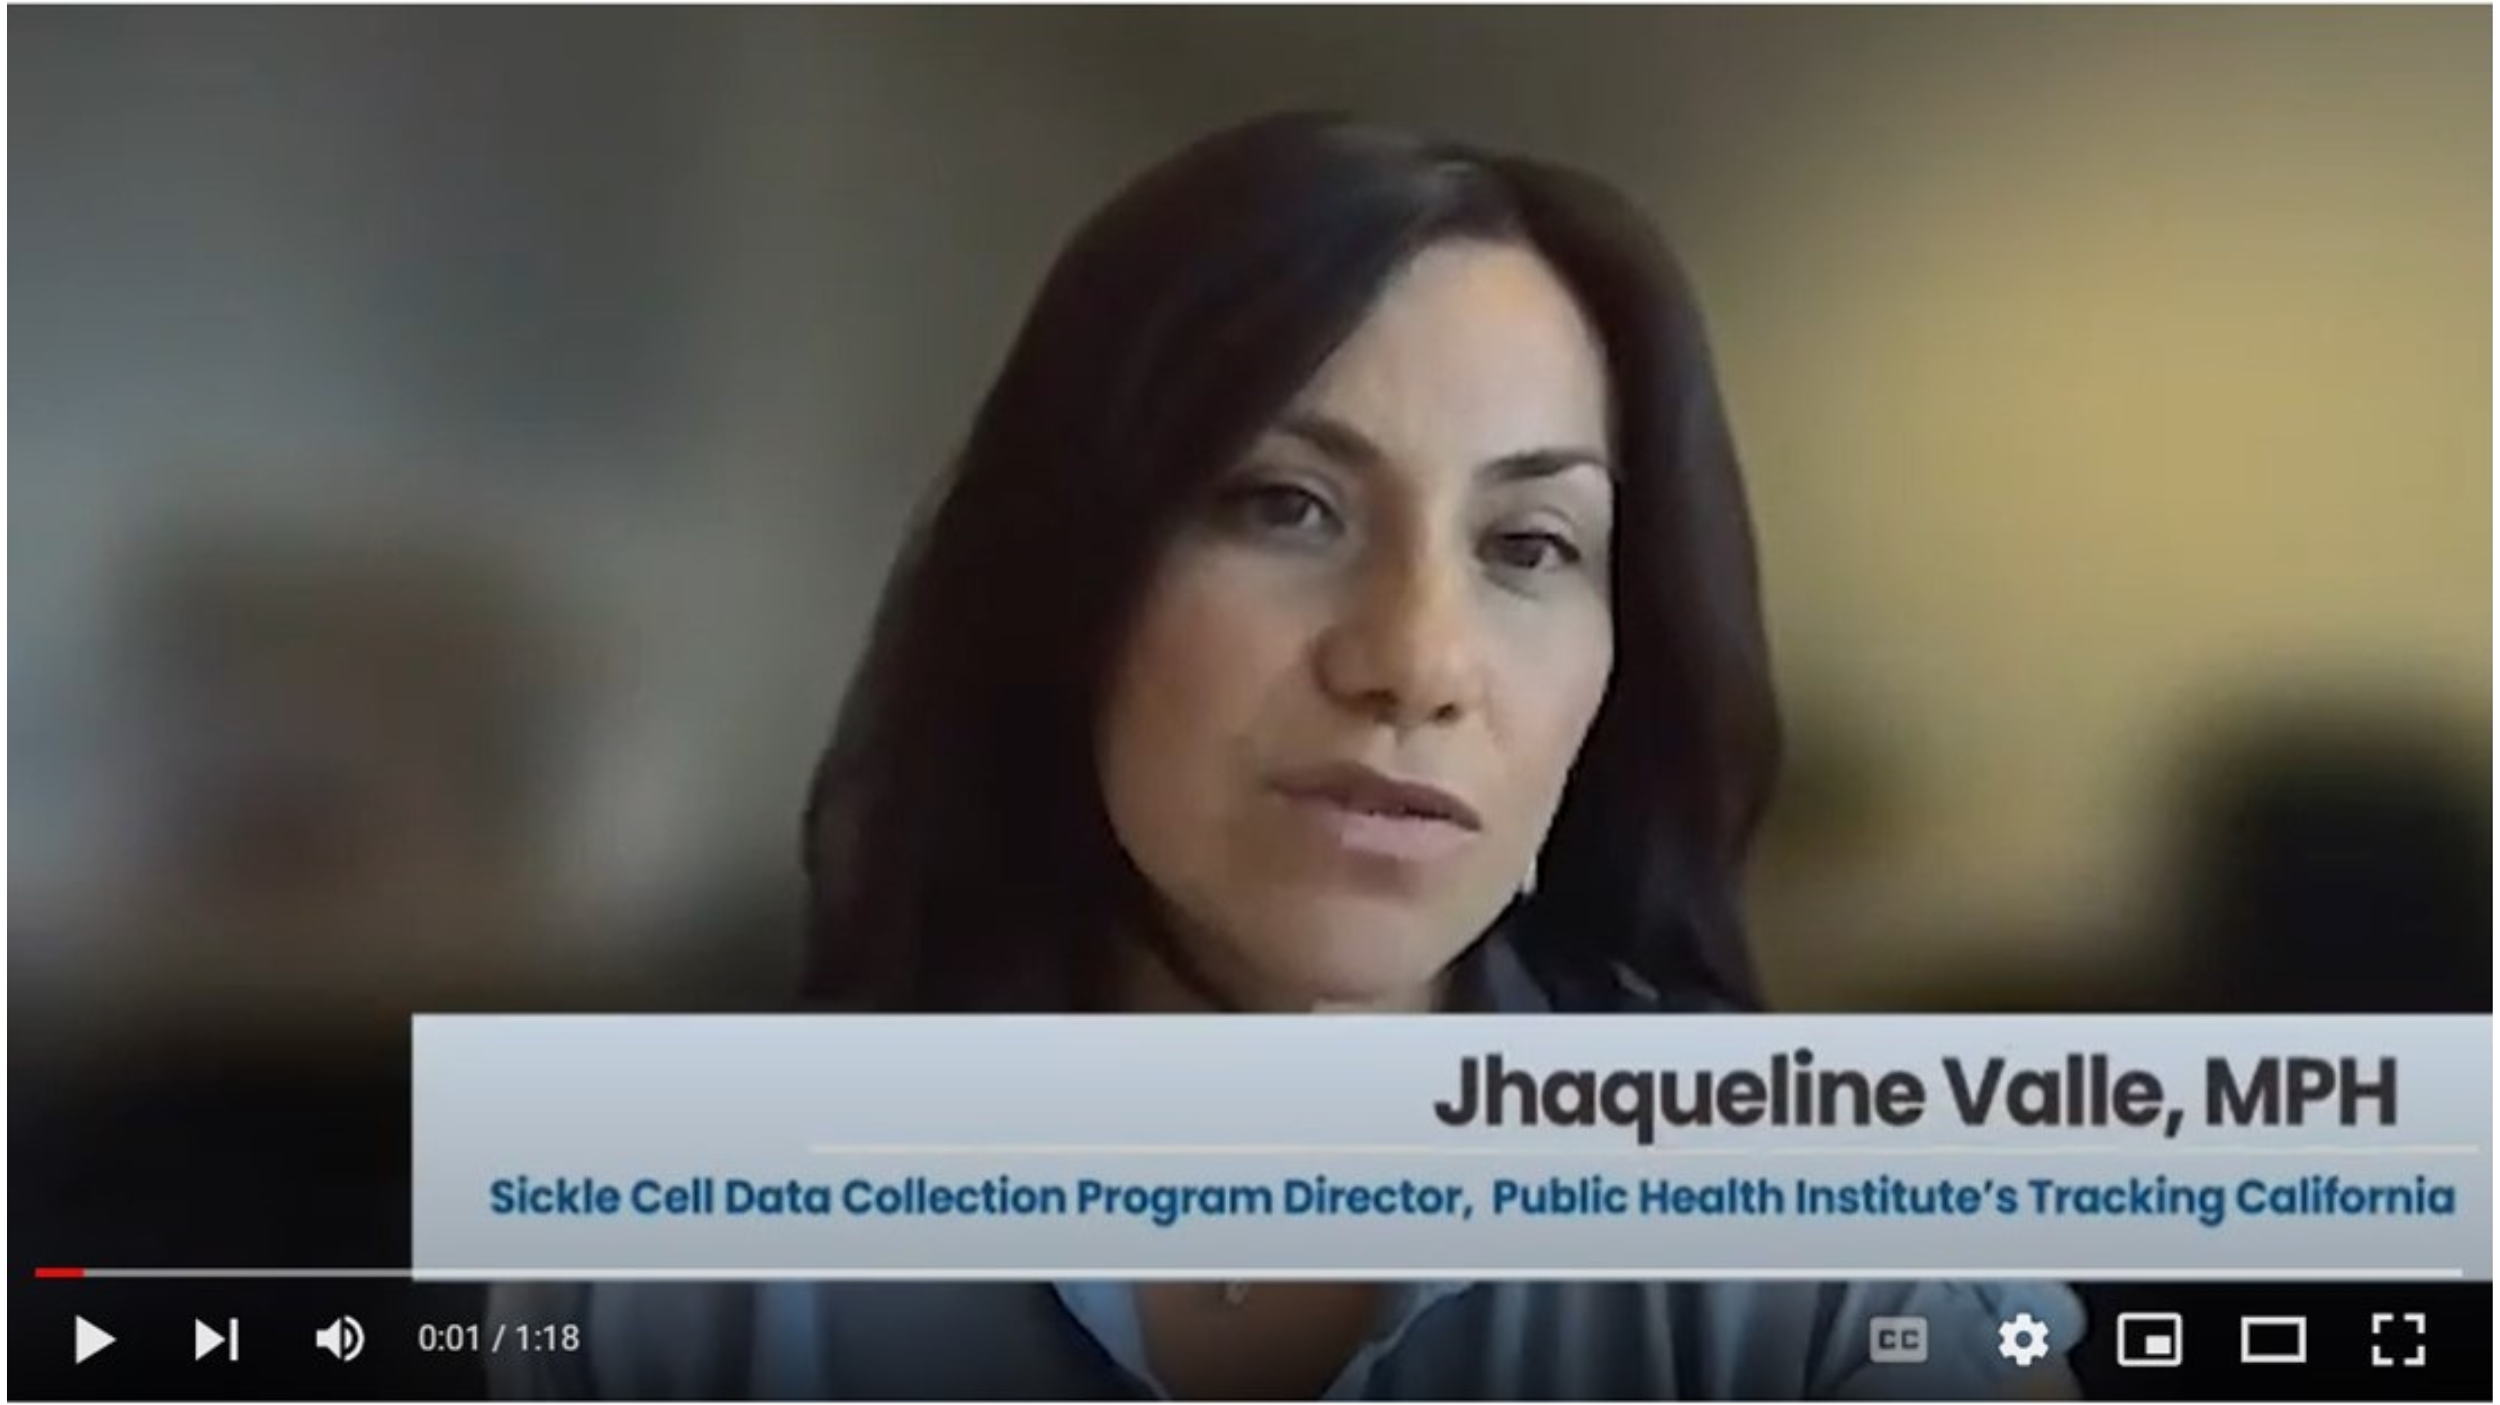 image of Jhaqueline Valle during an interview